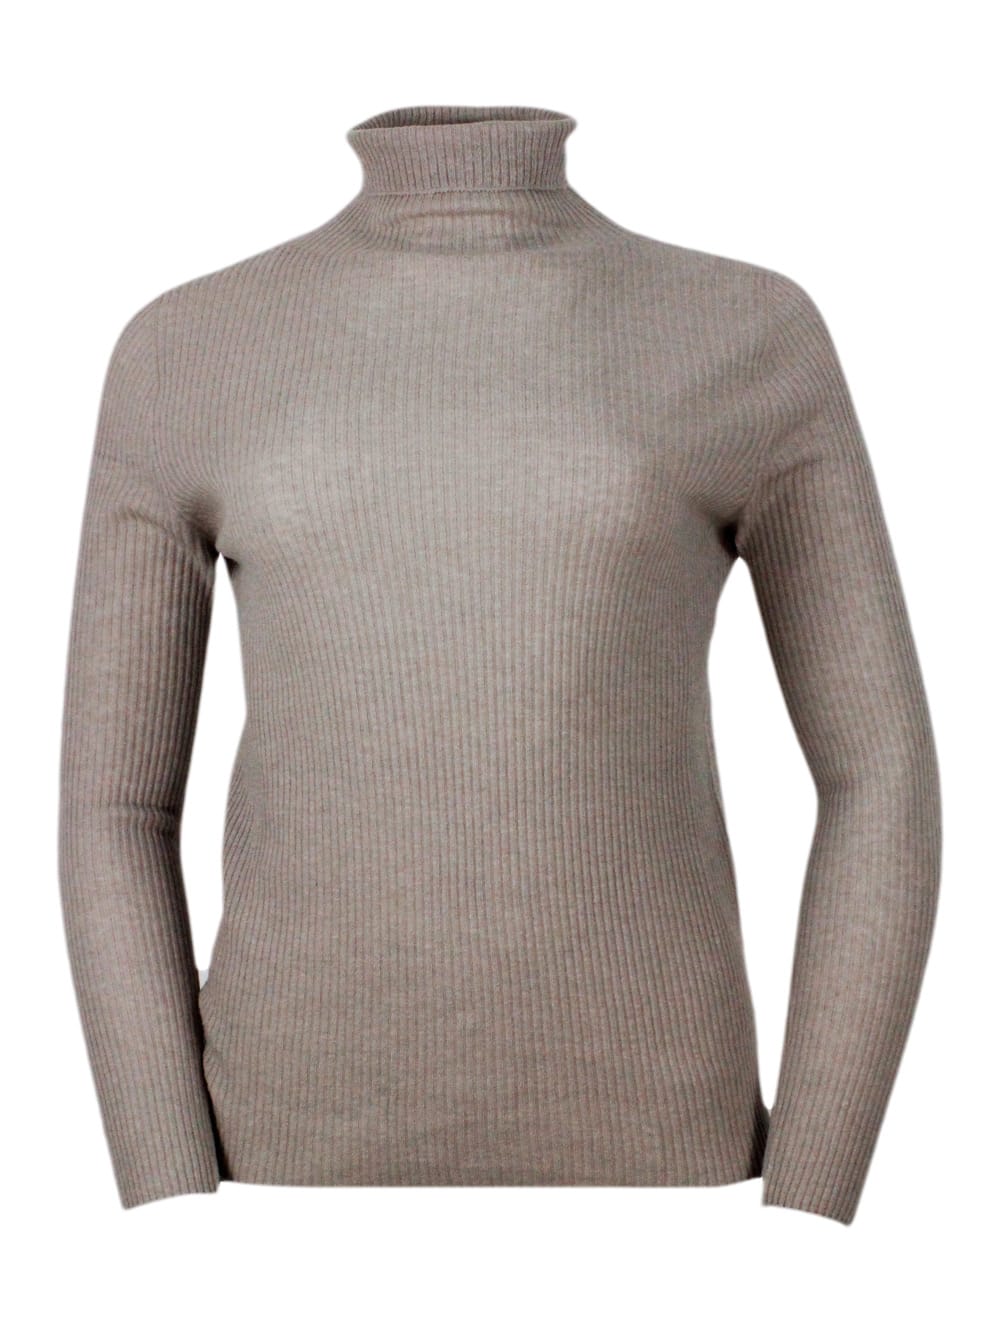 Lightweight Turtleneck Long-sleeved Sweater In Soft And Fine Wool, Silk And Cashmere With Small Rib Knit